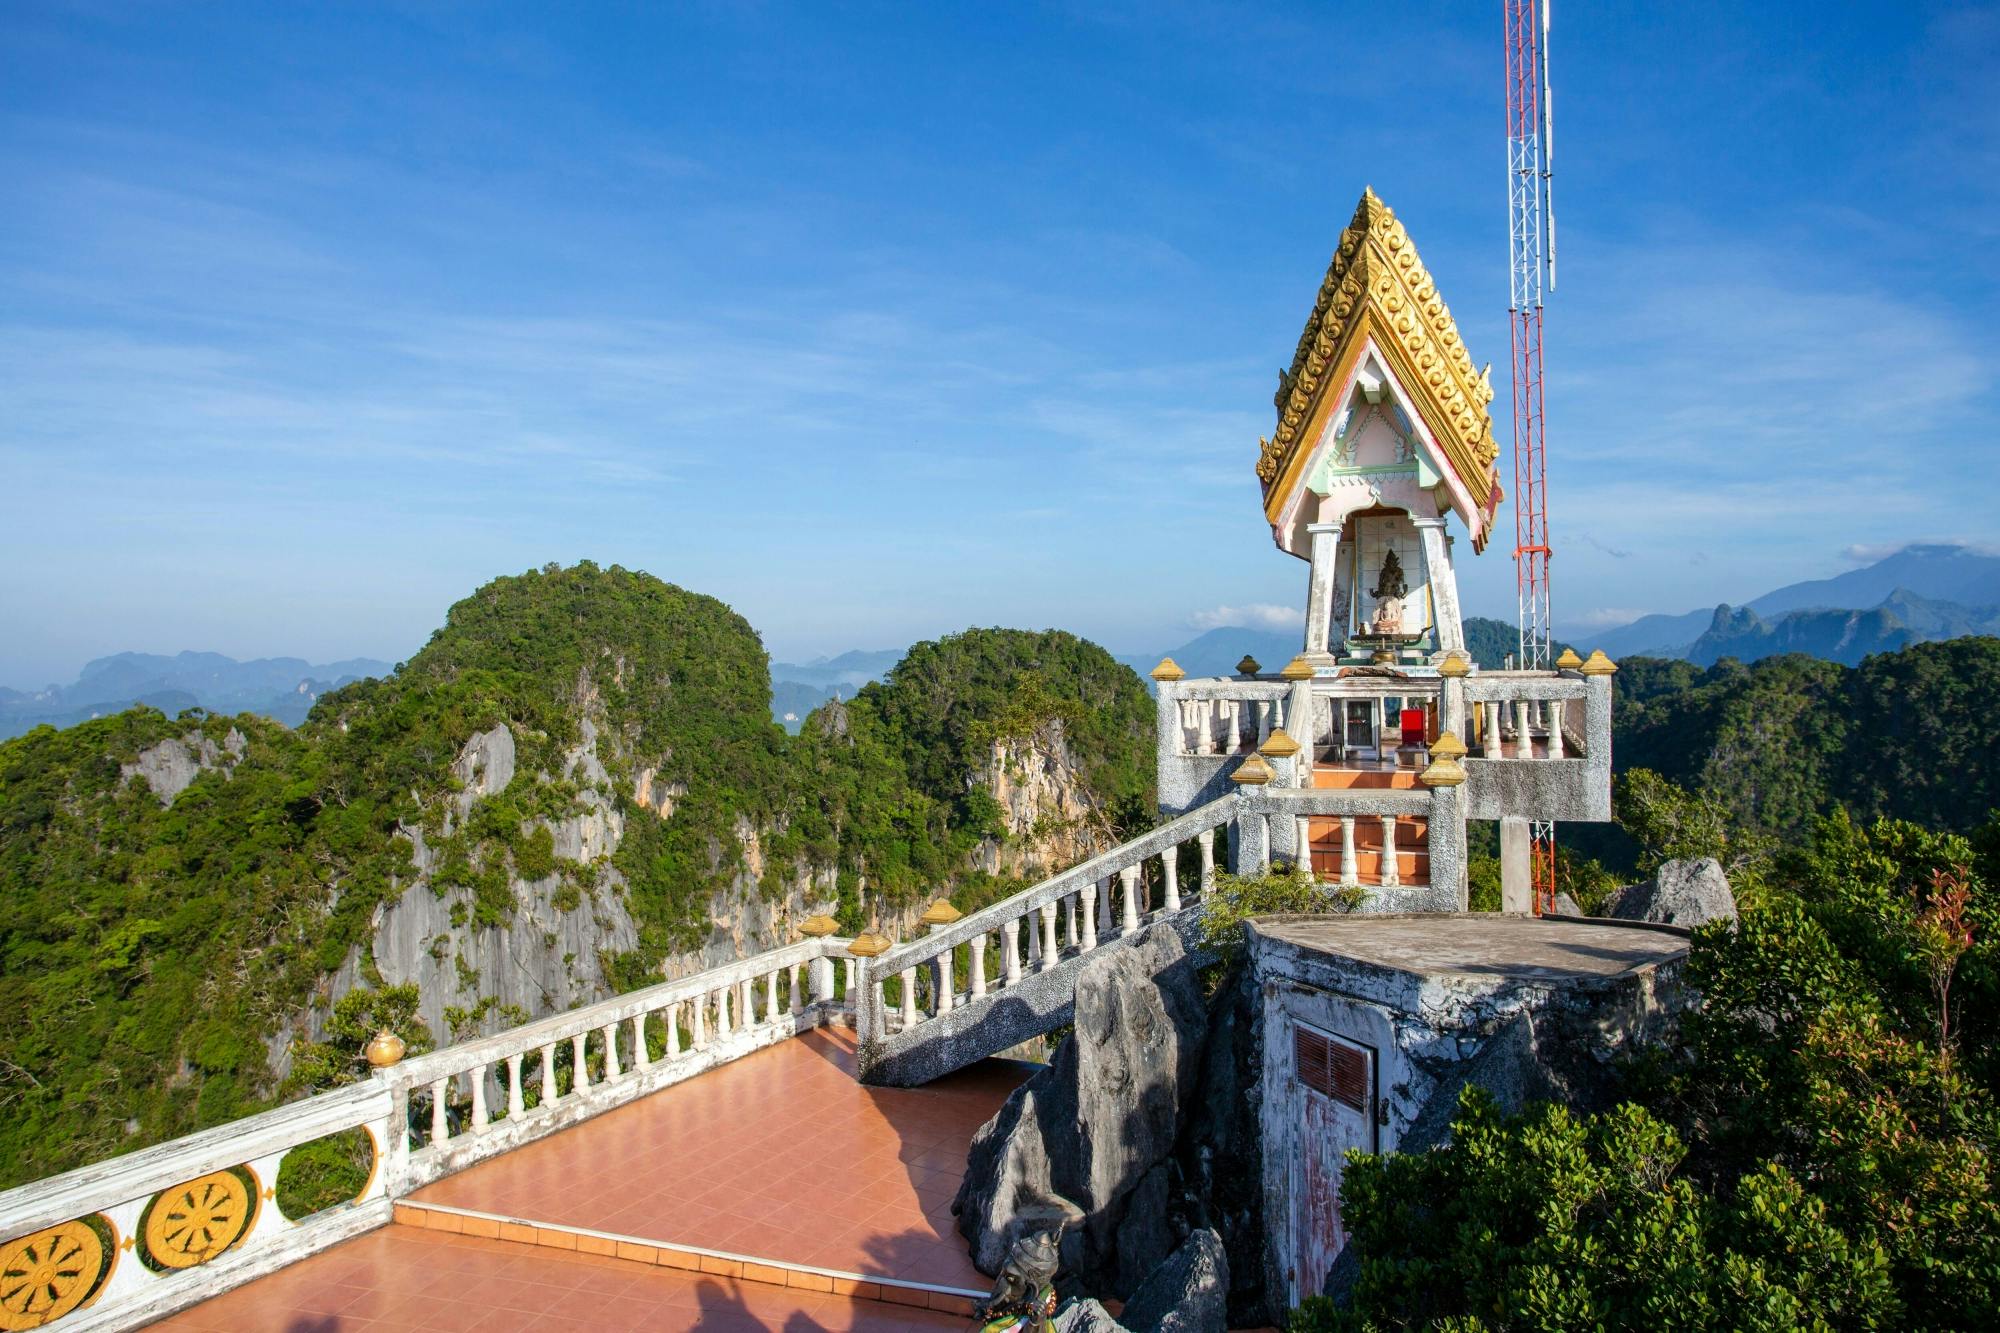 Krabi Jungle Tour with Hot Spring & Tiger Cave Temple